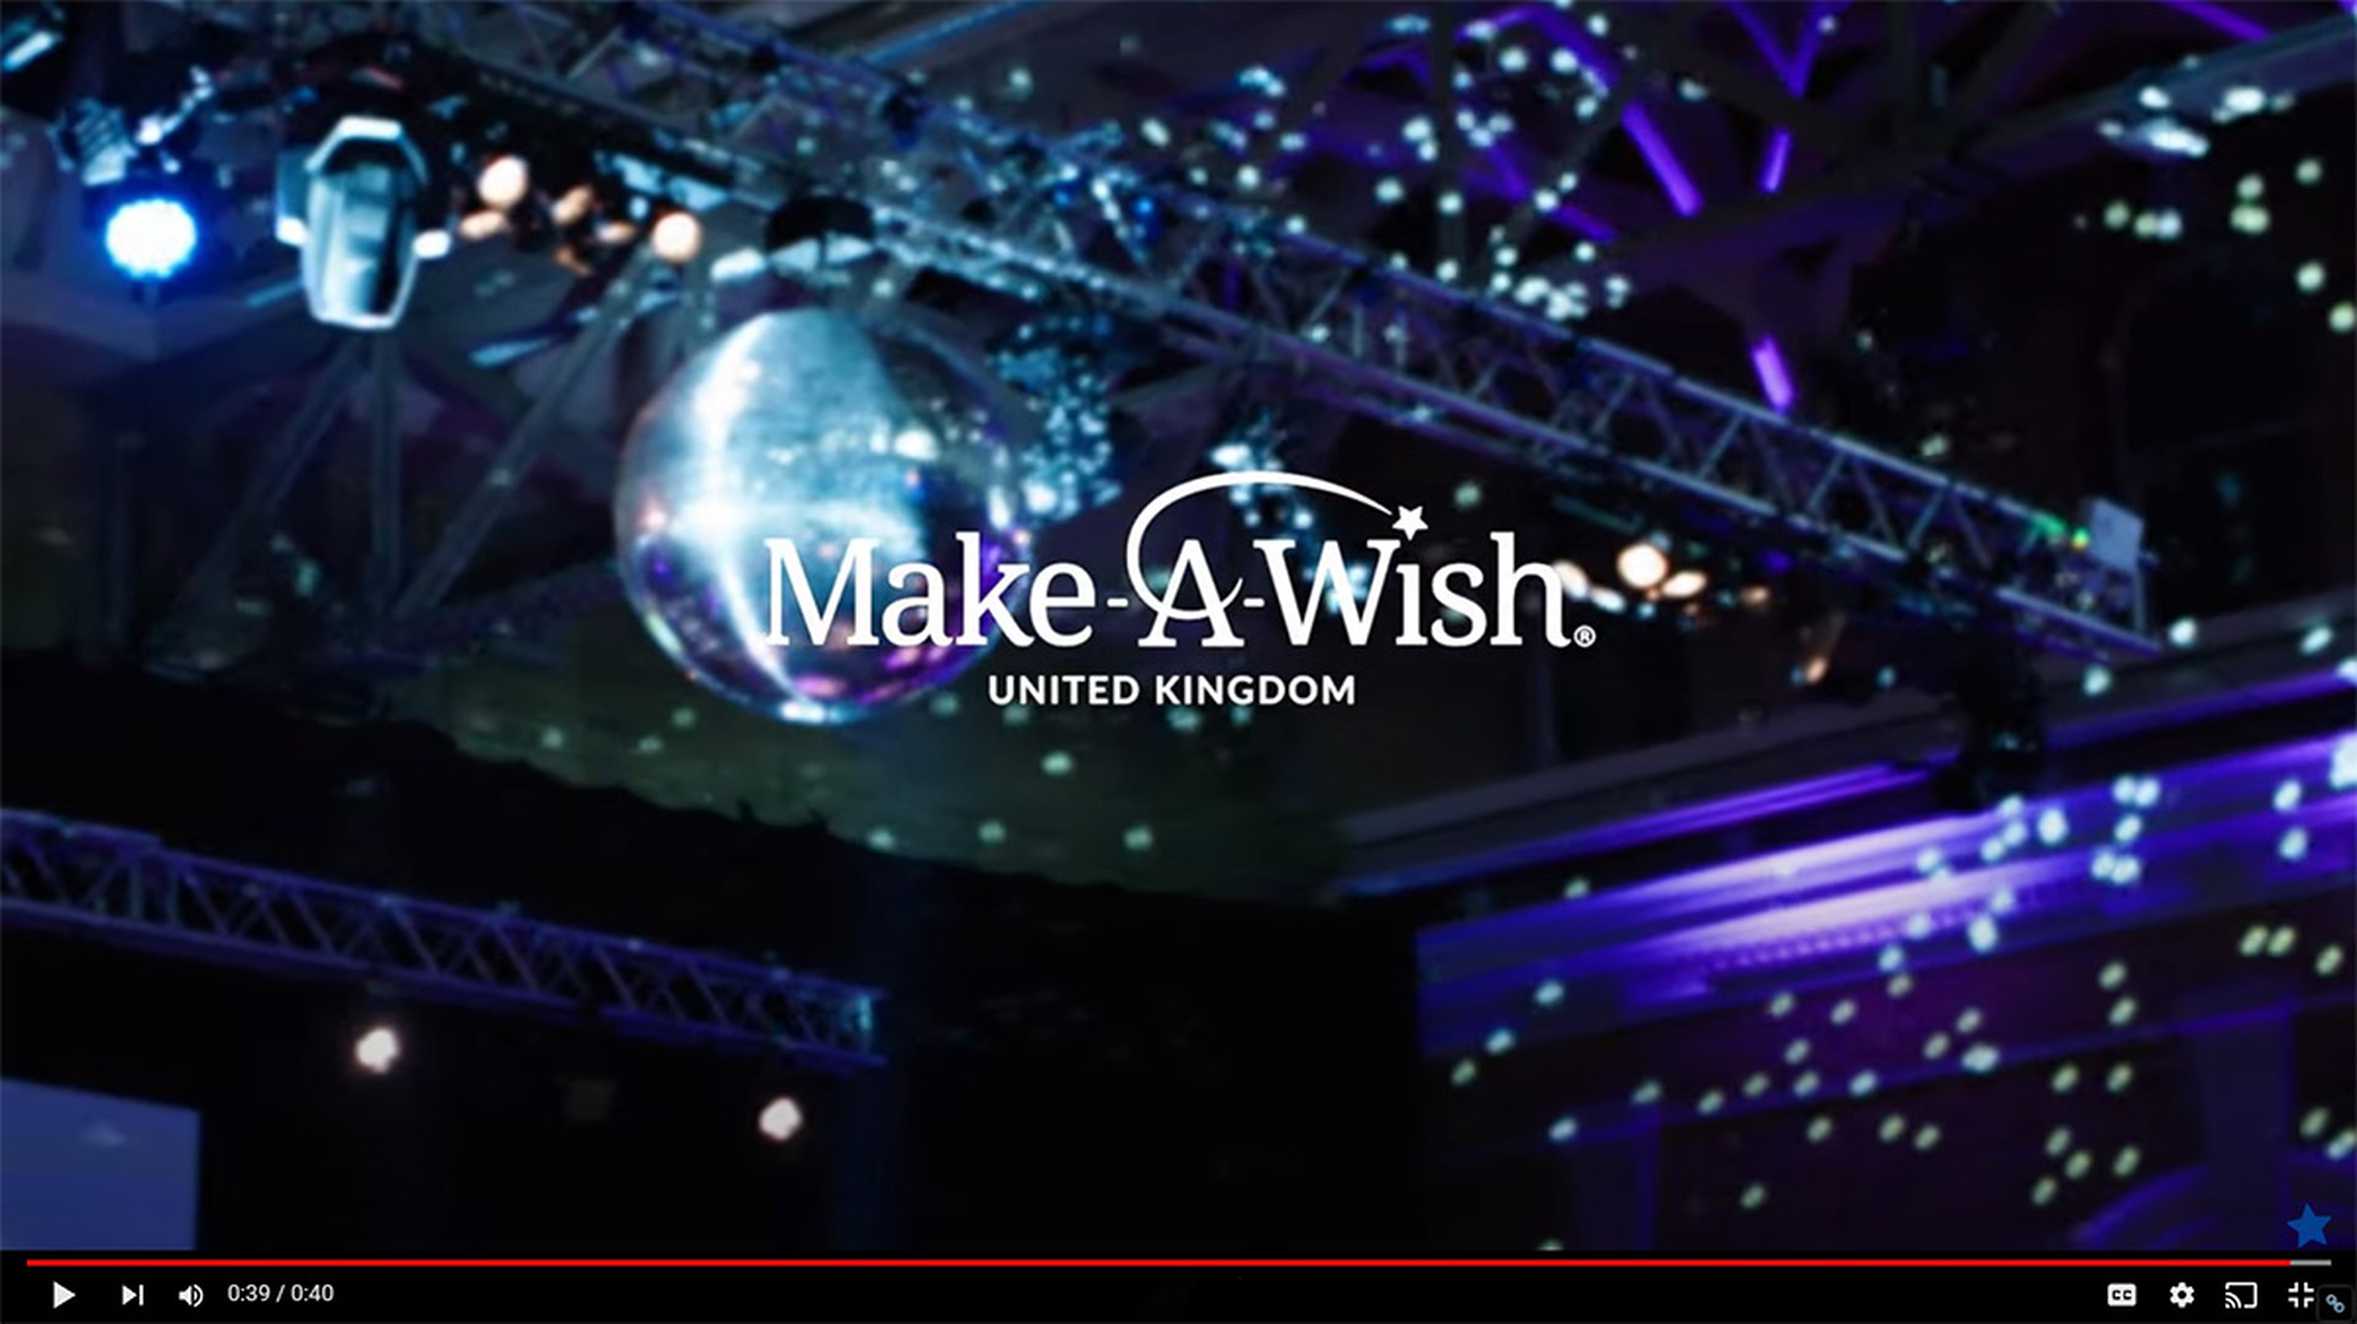 The Make-A-Wish logo in white against a background of the giant glitter ball and lighting gantry from the 2022 Make-A-Wish Ball.